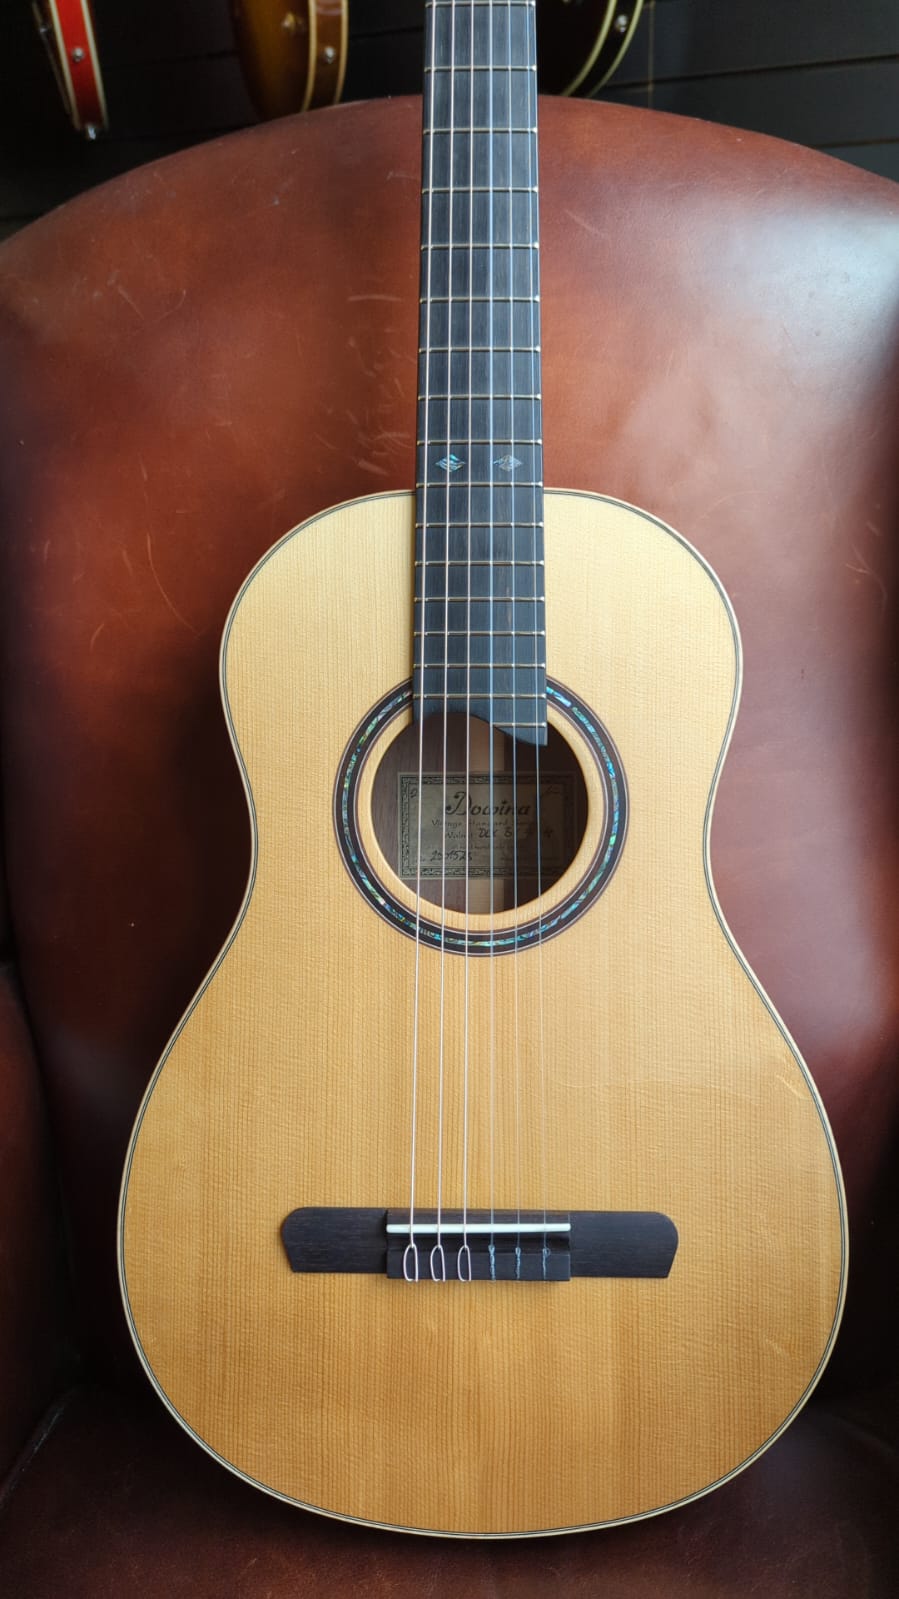 Dowina Walnut BV-H Deluxe Torrified Spruce, Acoustic Guitar for sale at Richards Guitars.